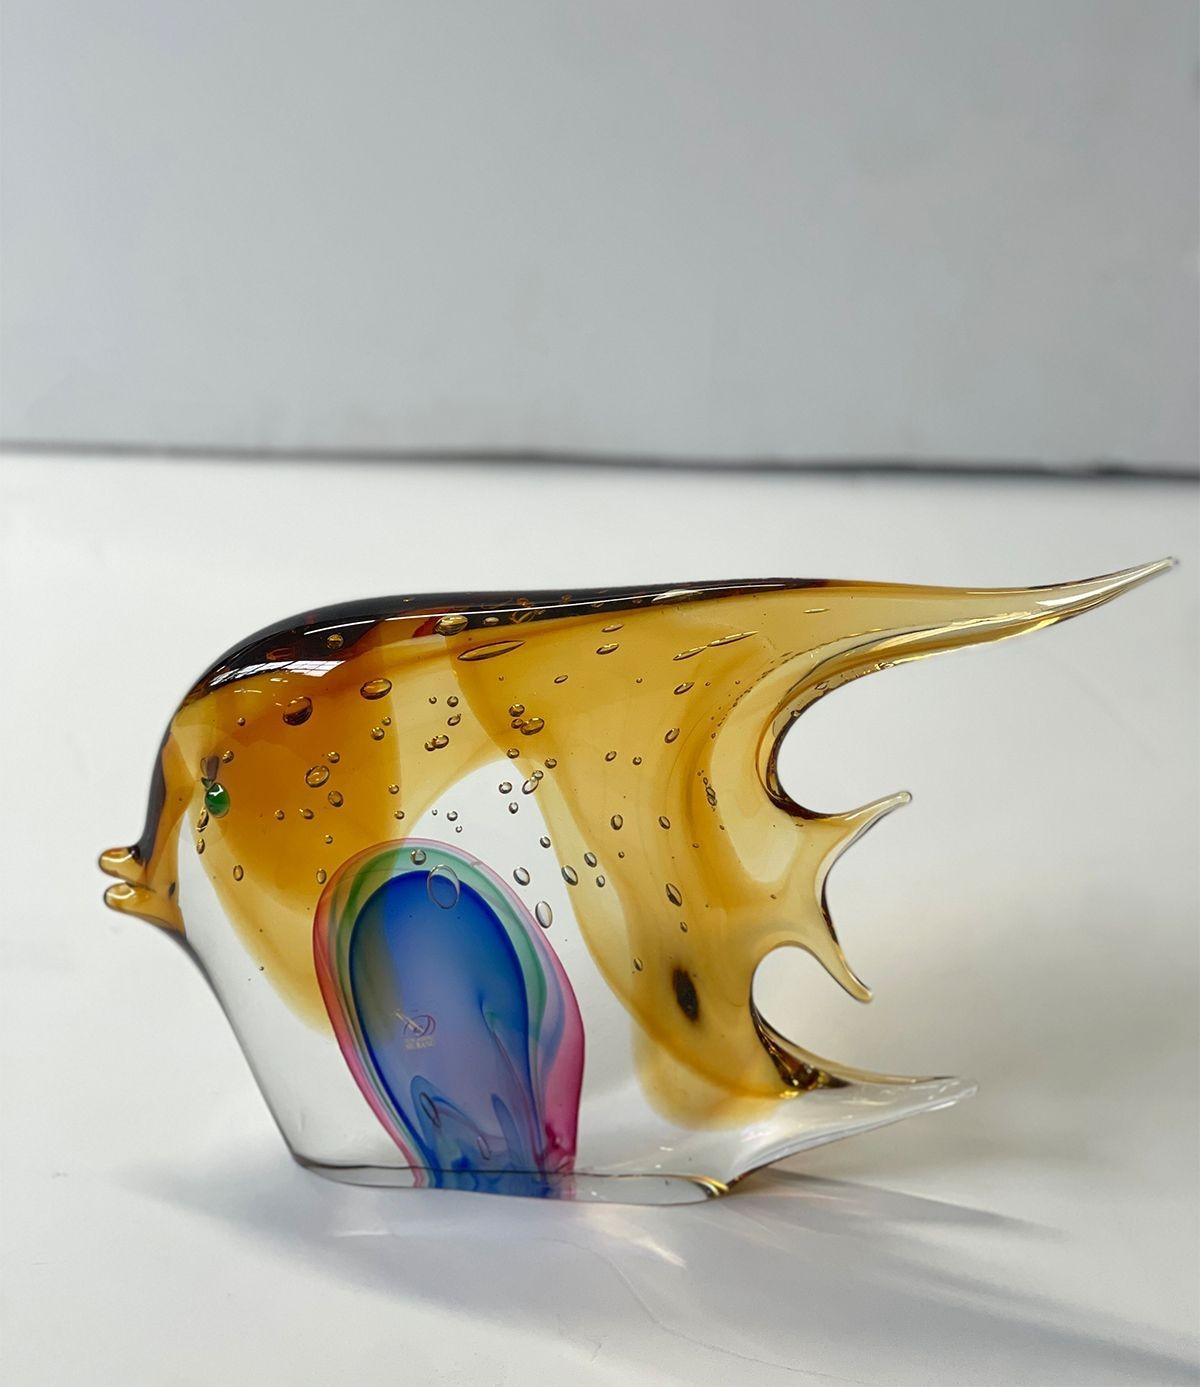 Murano fish sculpture by Sergio Costantini for Vetro Artistico Murano with amber, blue, pink and green Murano glass. Made in Italy, 20th Century (includes sticker and signature).
Dimensions:
10